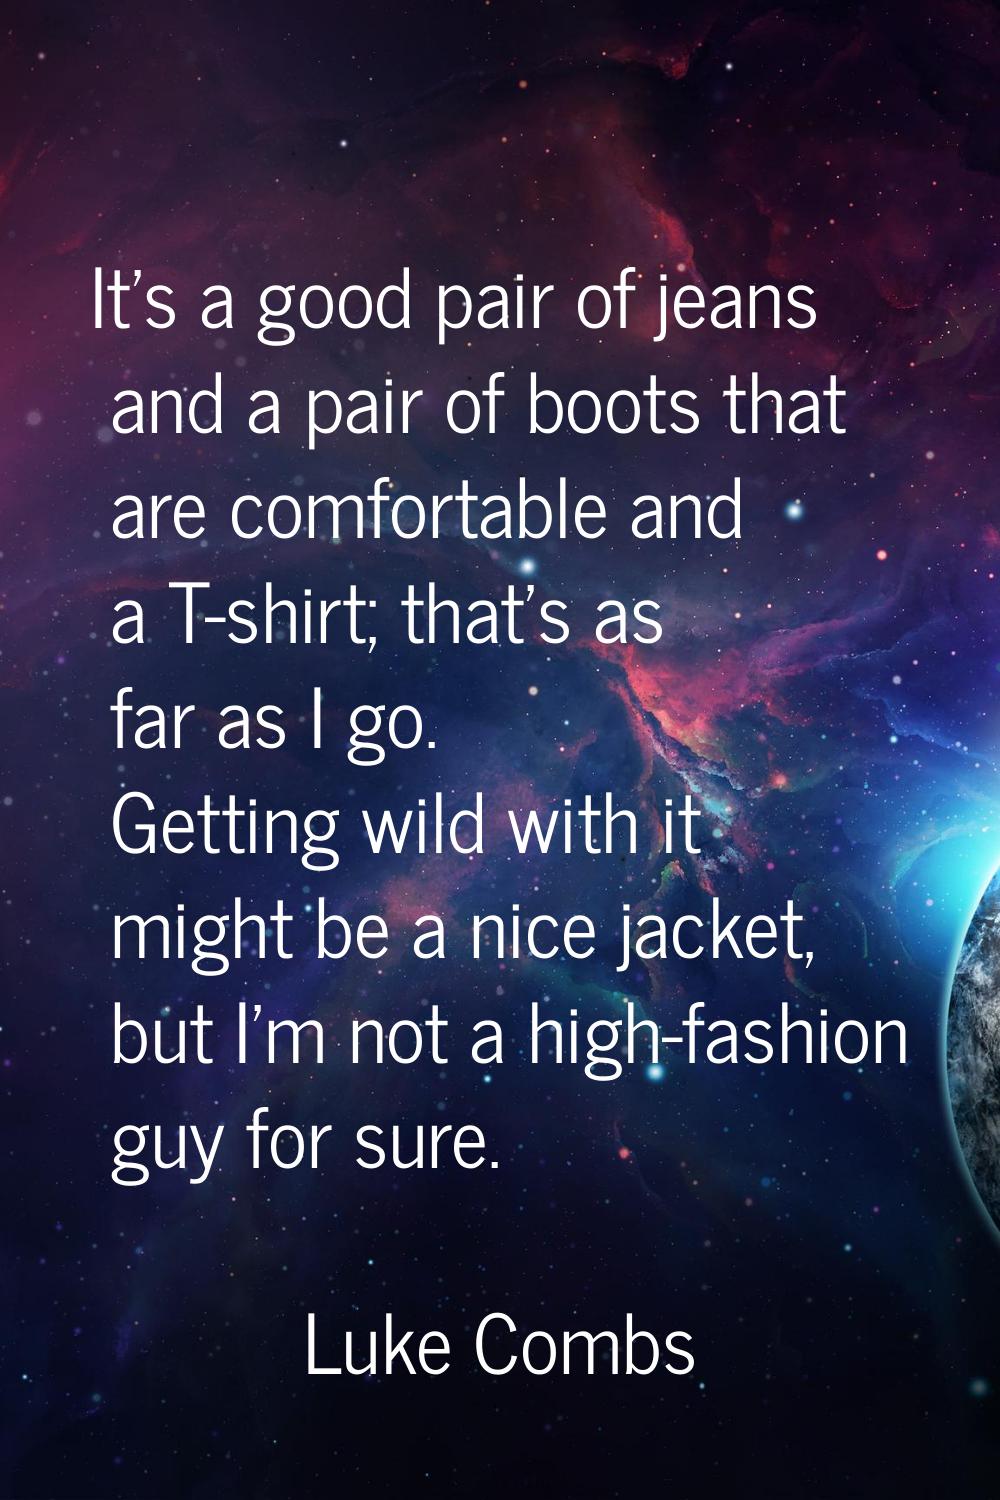 It's a good pair of jeans and a pair of boots that are comfortable and a T-shirt; that's as far as 